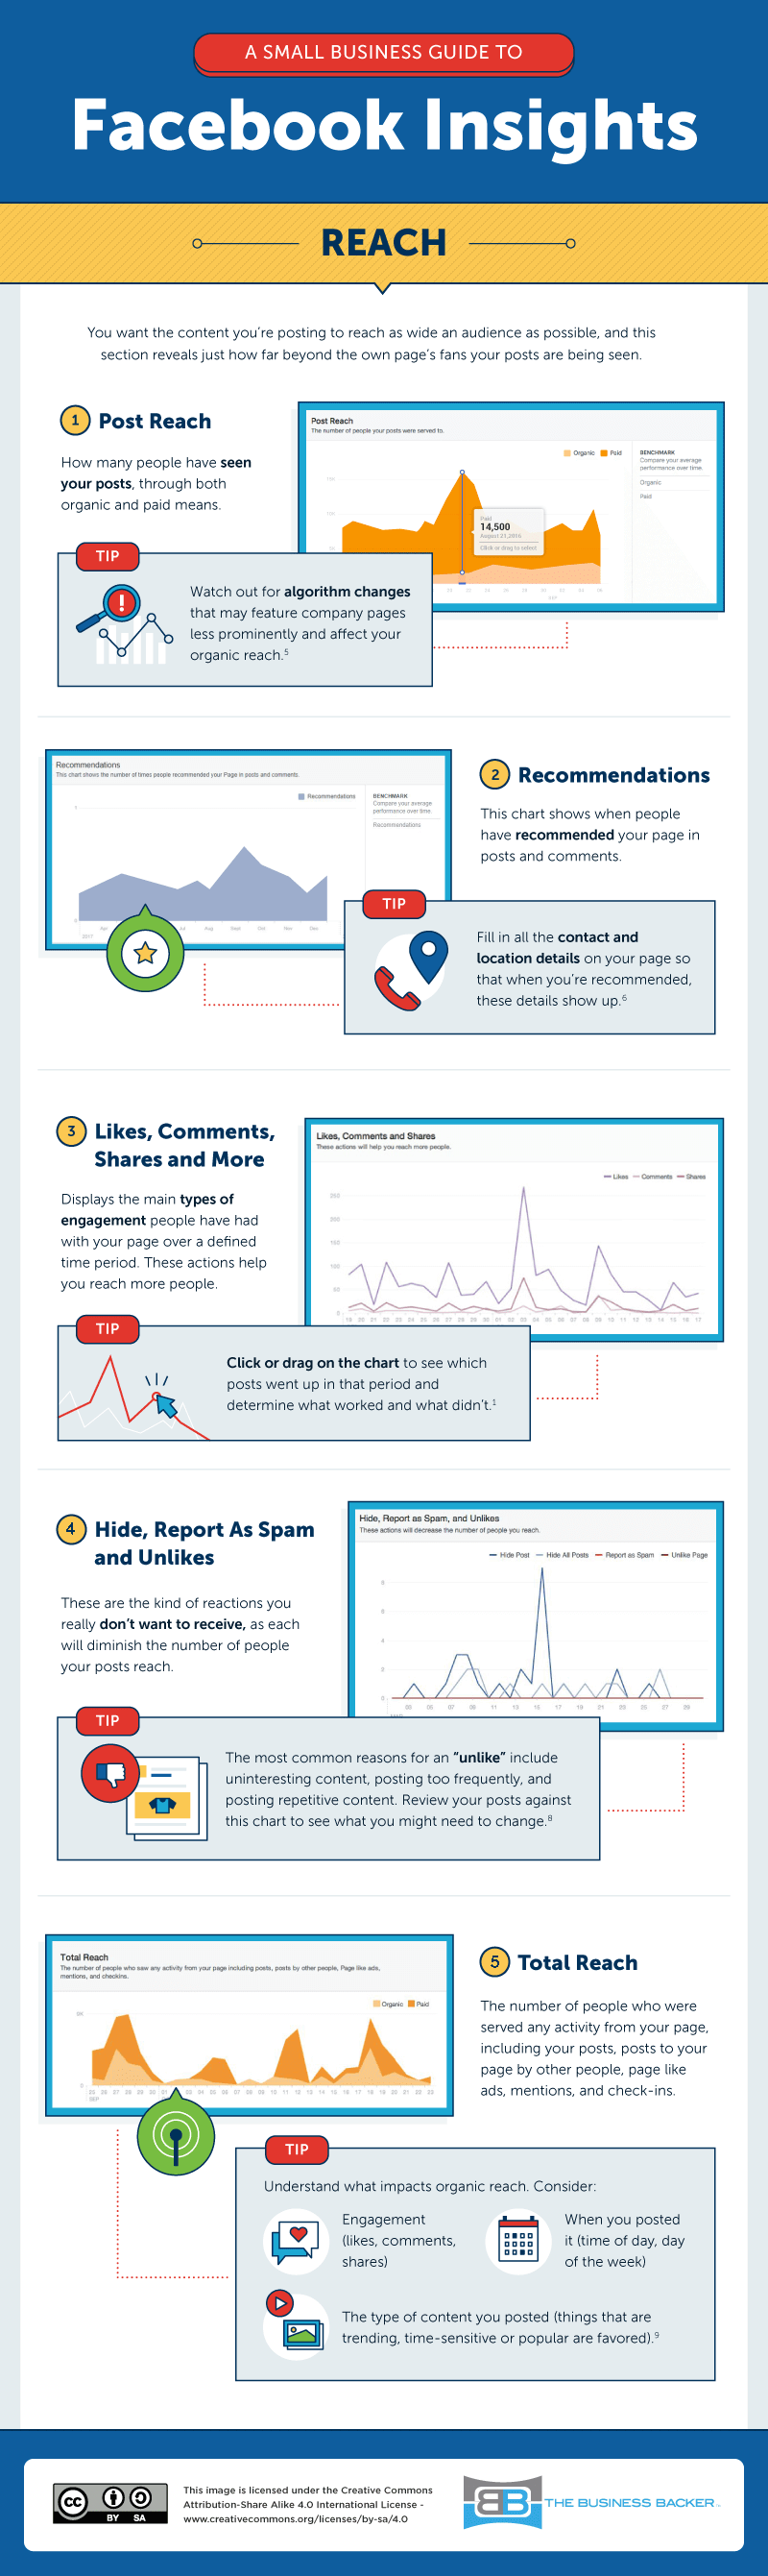 facebook page reach insights